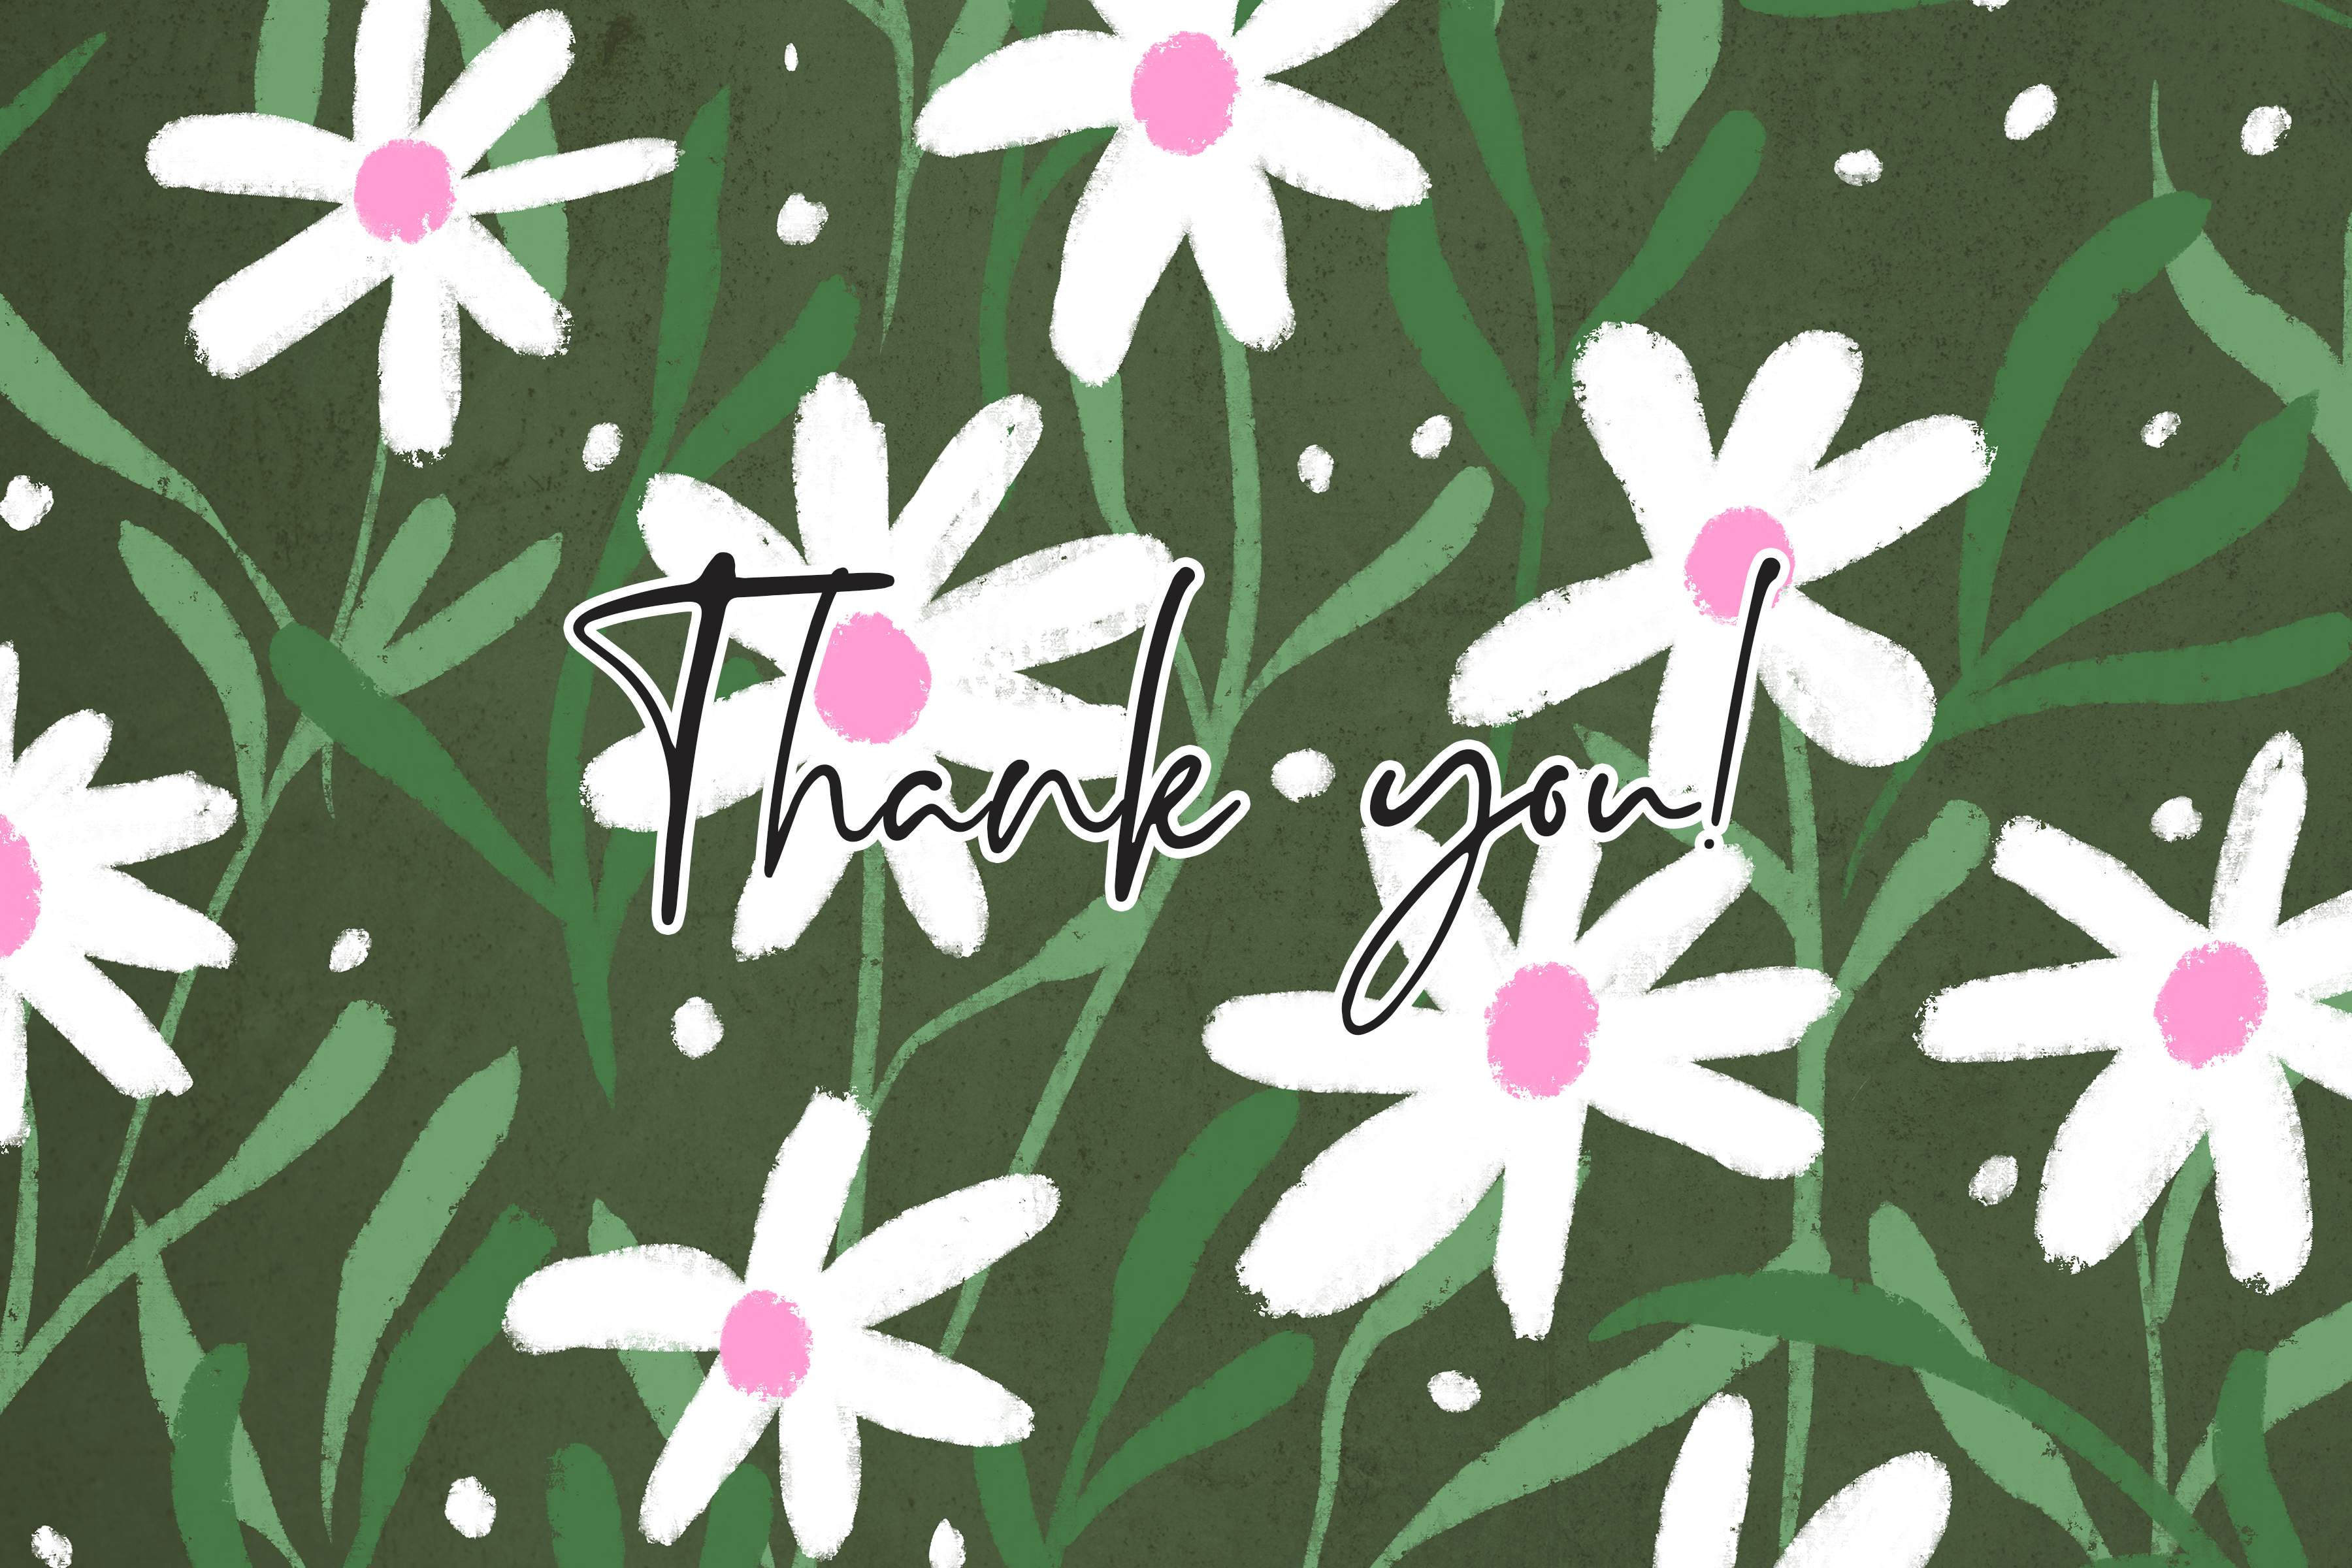 Thank you card with white daisies on a green background.